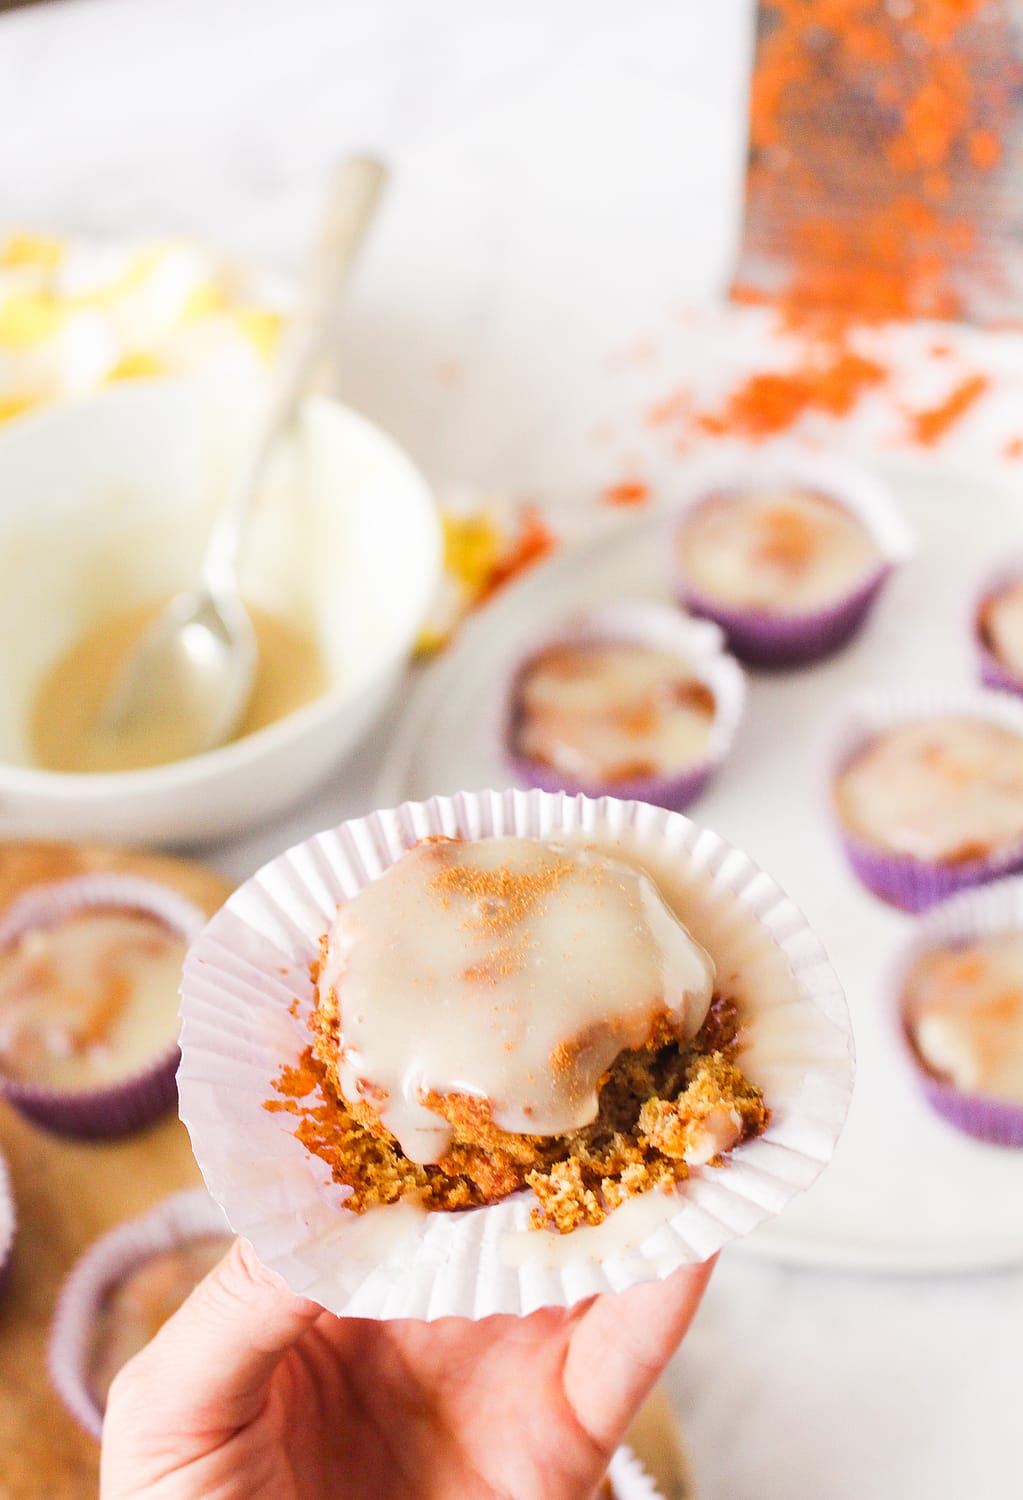 Healthy Carrot Cake Cupcakes with almond flour (gluten-free, dairy-free) -